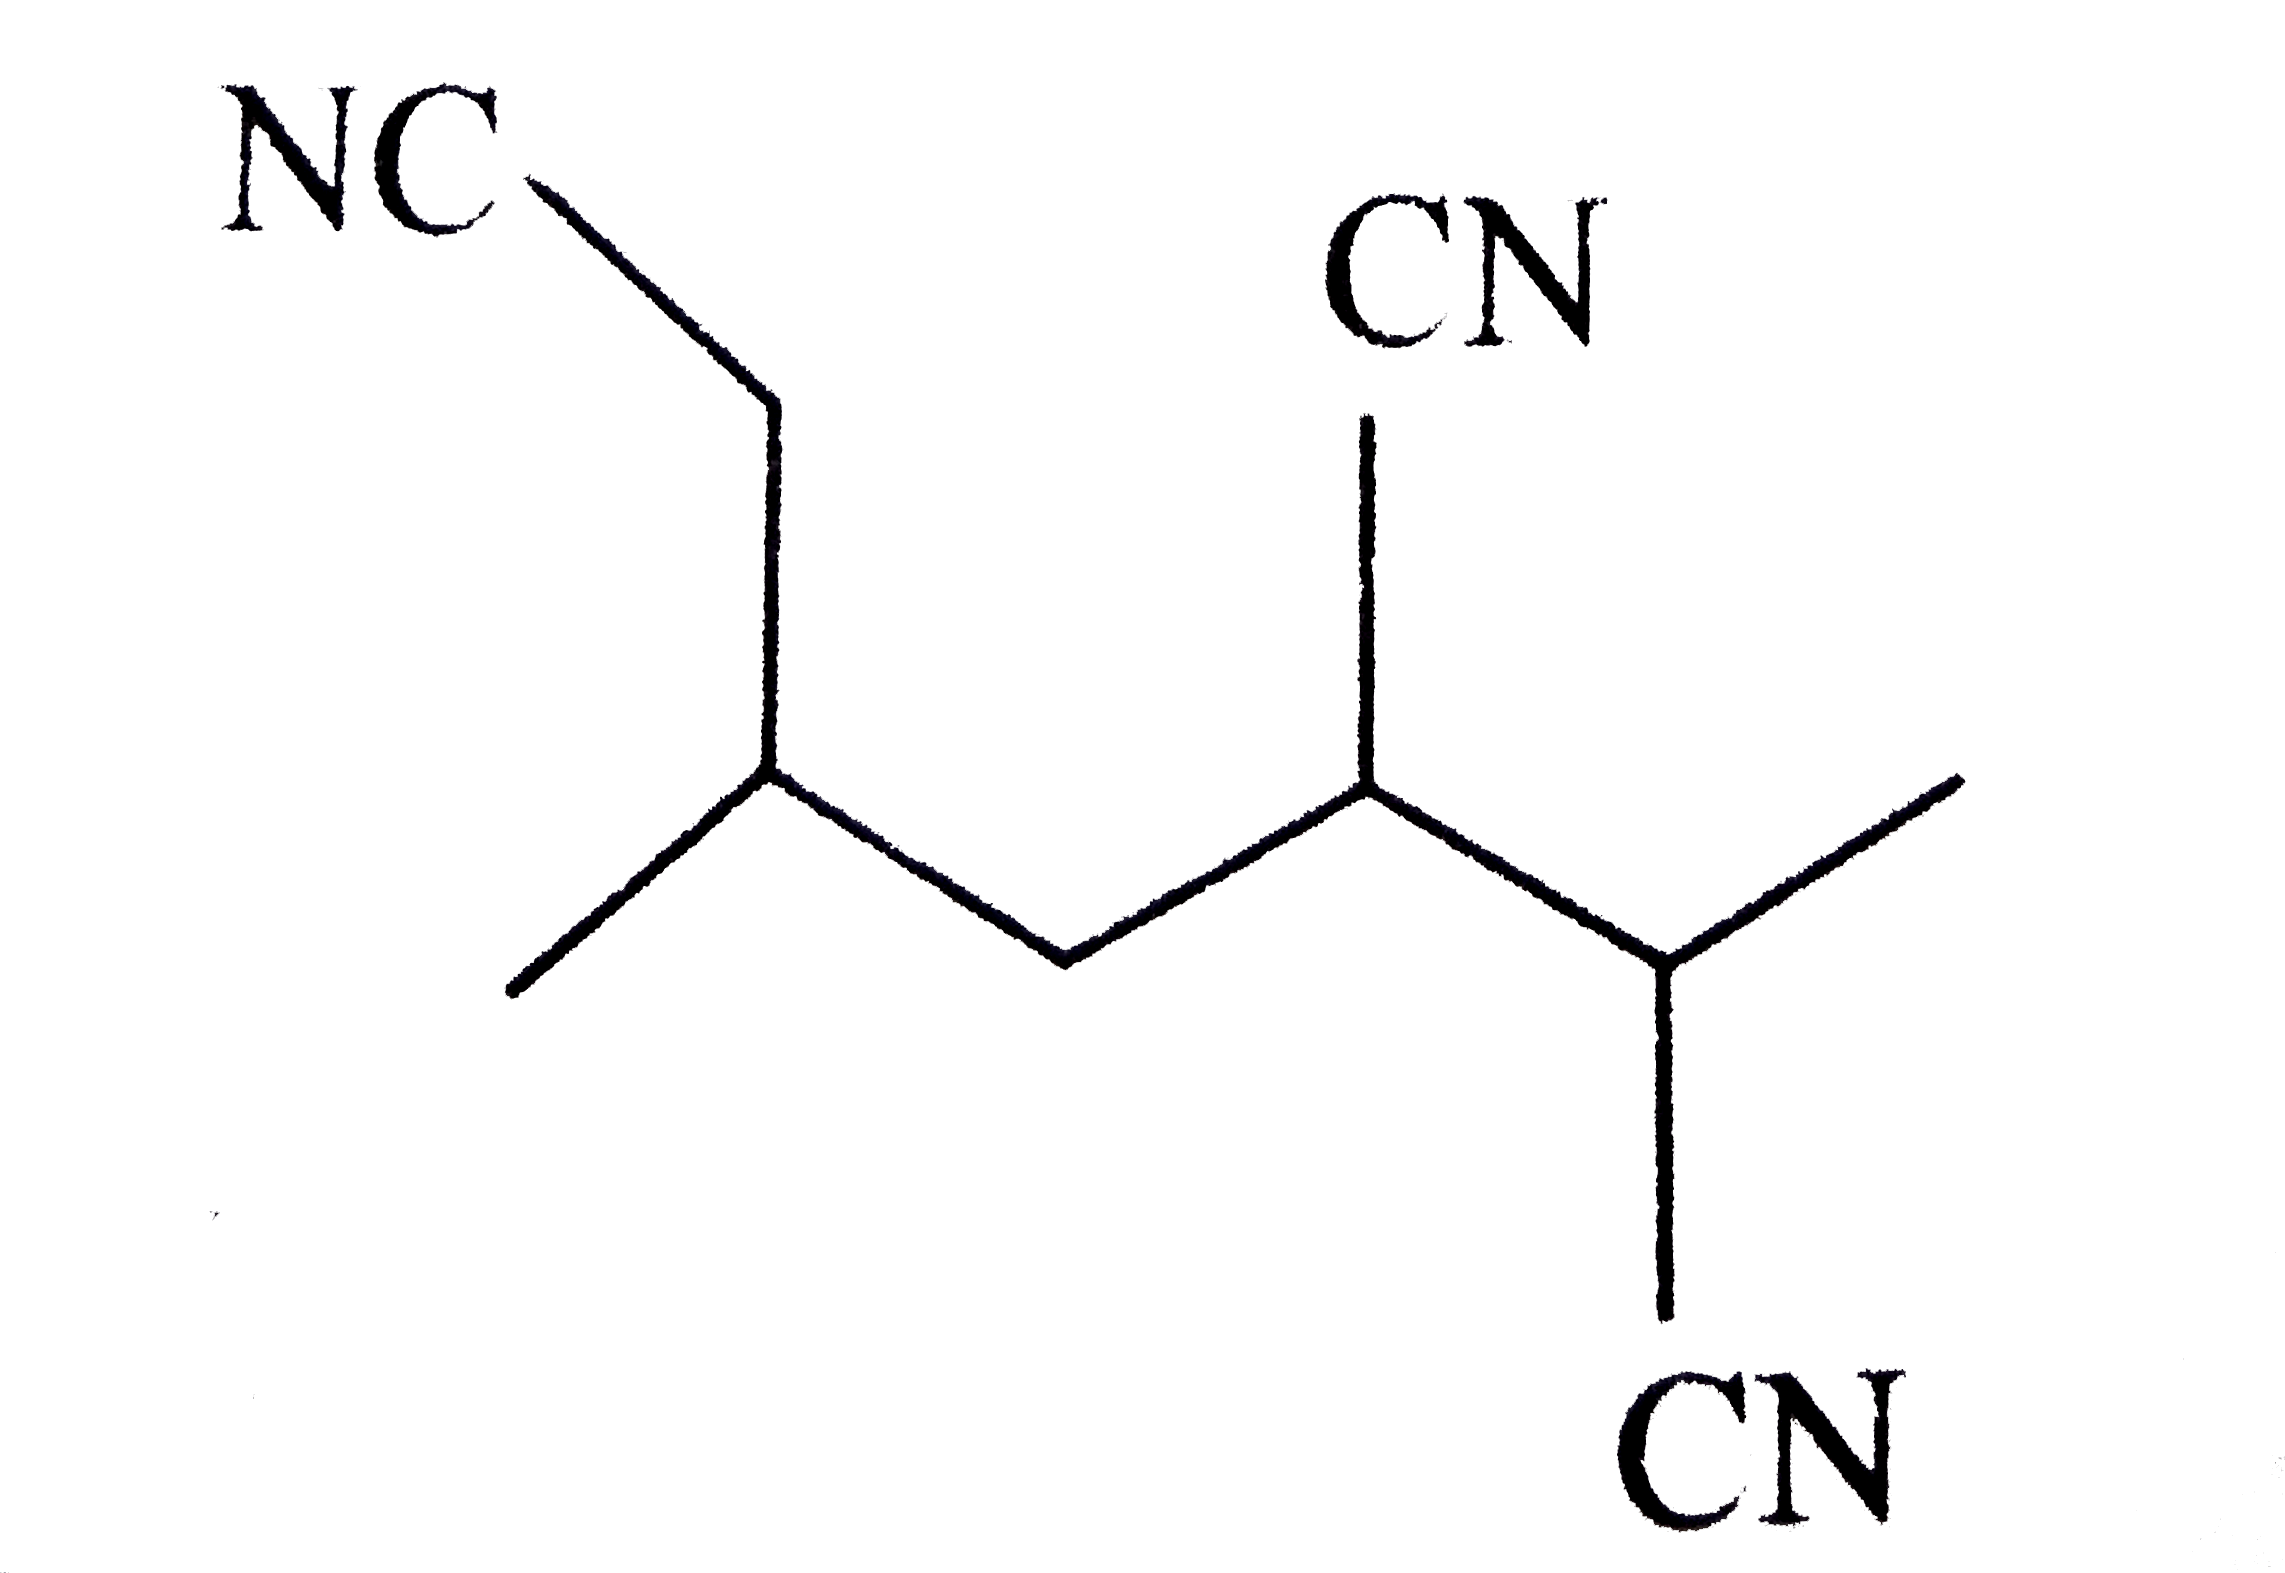 What is the correct IUPAC name of the compound ?